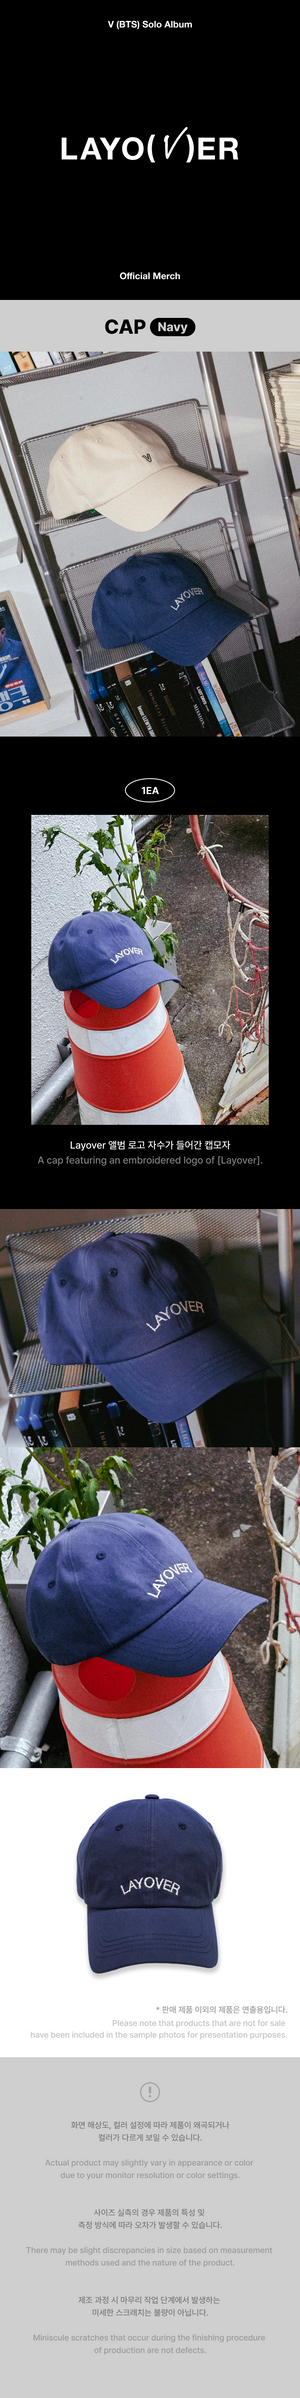 BTS V - LAYOVER 1ST SOLO ALBUM OFFICIAL MD - COKODIVE